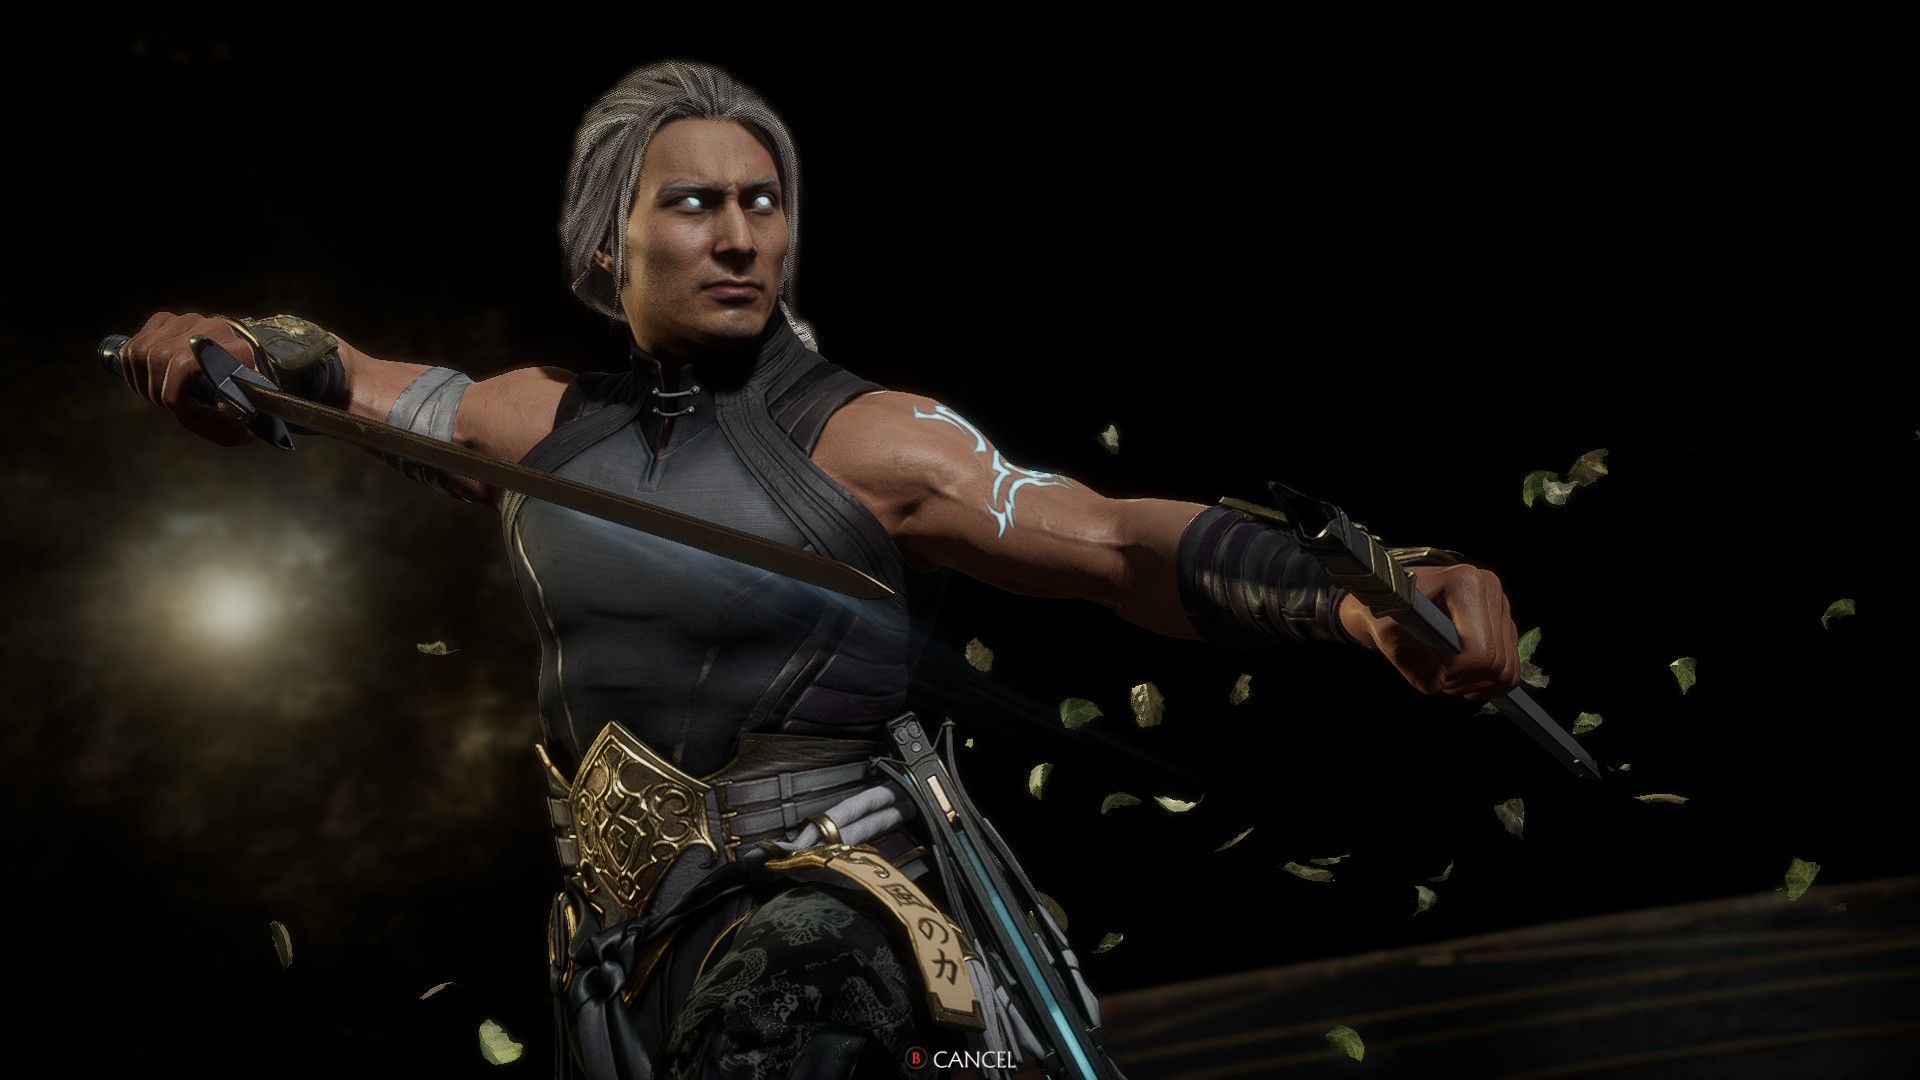 Steam Community :: Guide :: MK11 Basic Guide to all Characters/Matchups